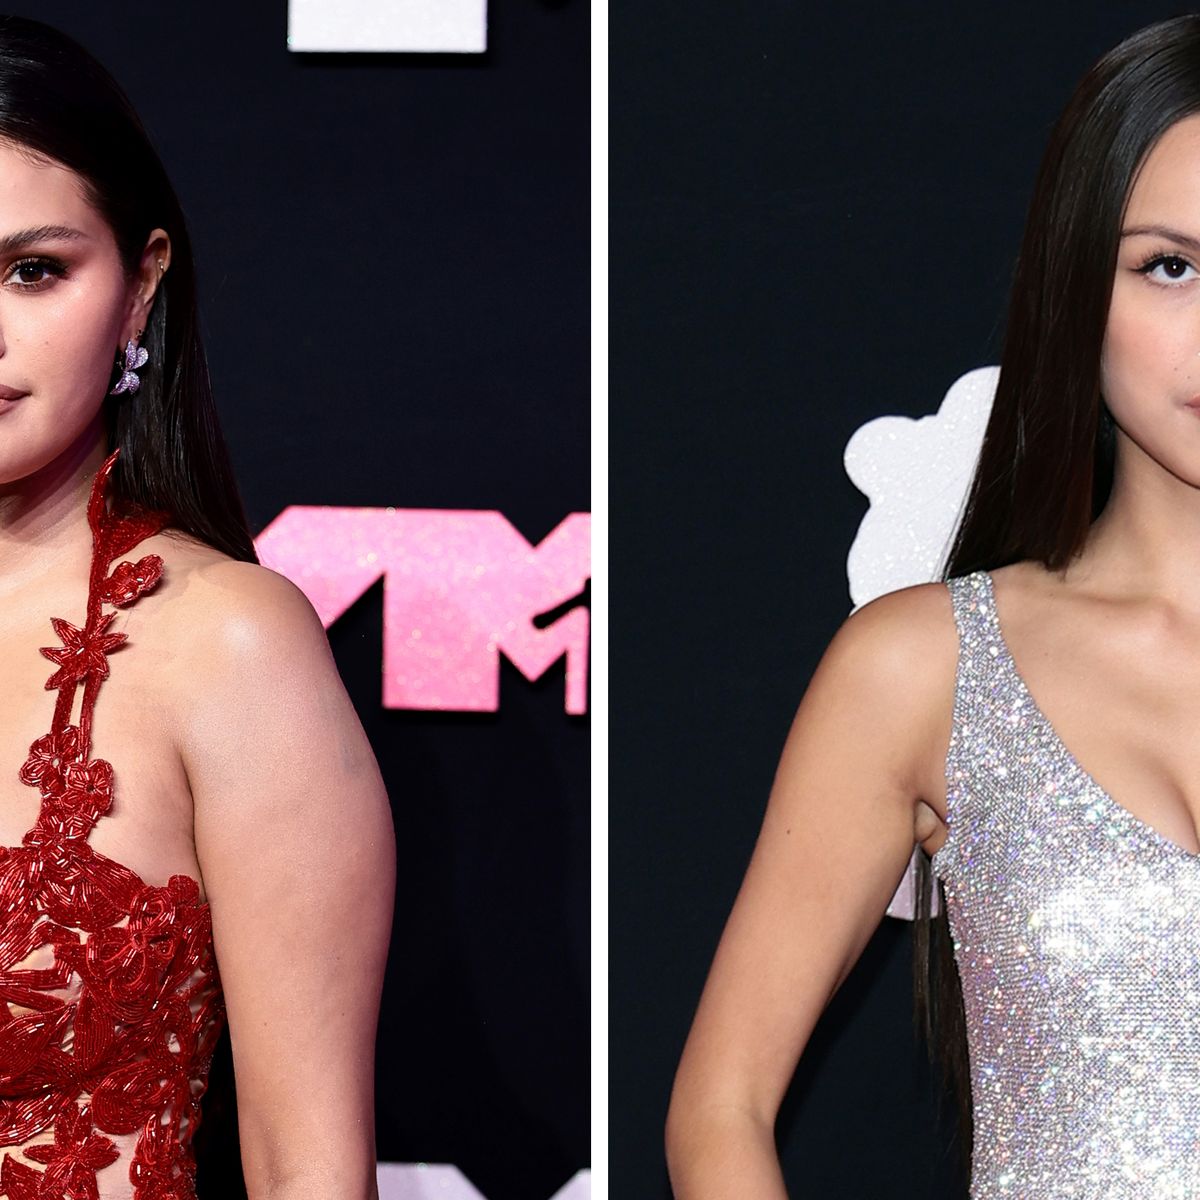 Selena Gomez Serves Up Major Side Boob to Wrap an Otherwise